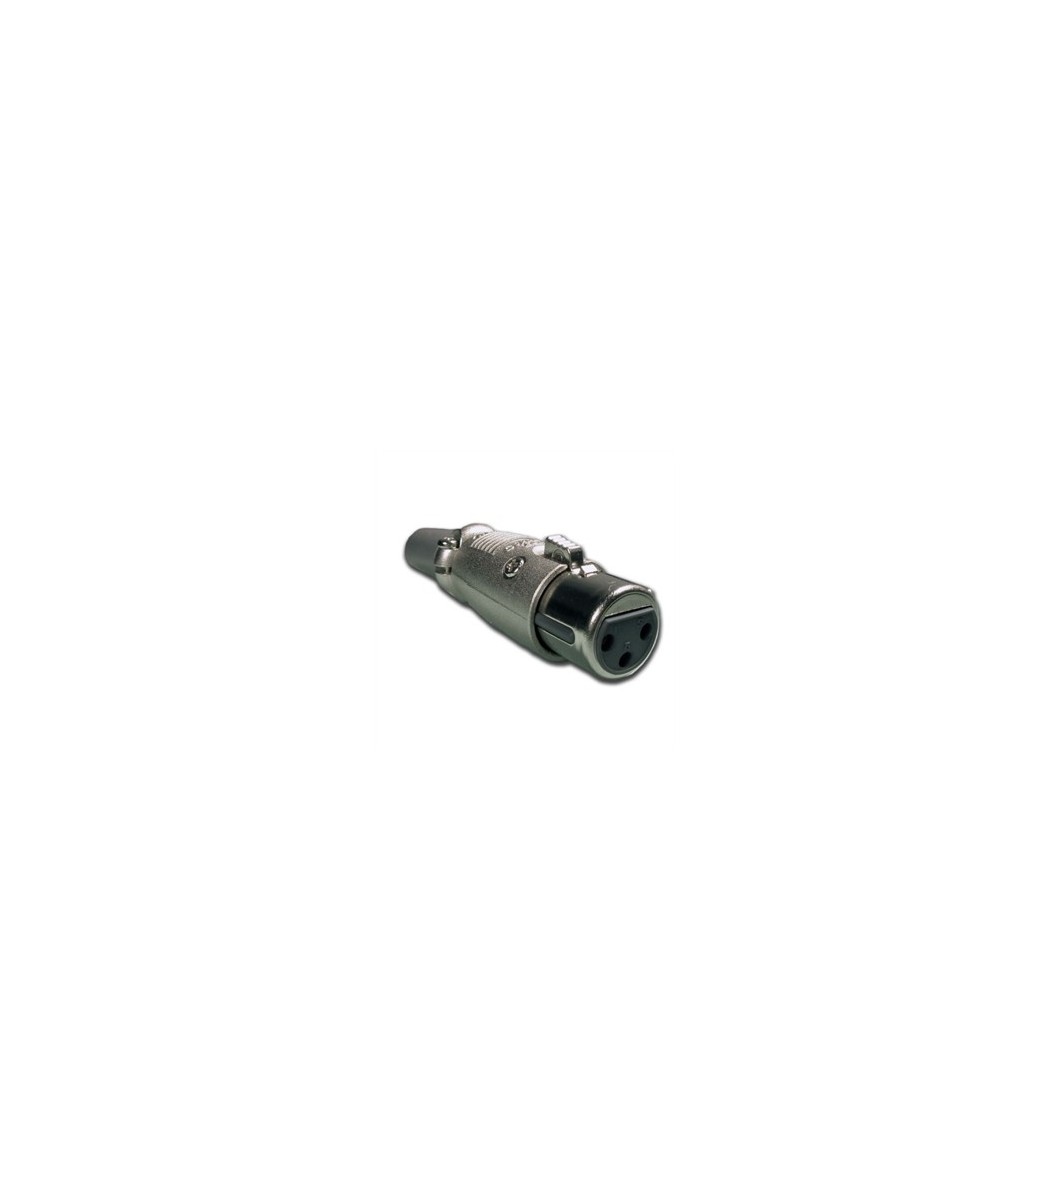 XLR Audio Connector, 3 Contacts, Plug, Cable Mount, Silver Plated Contacts